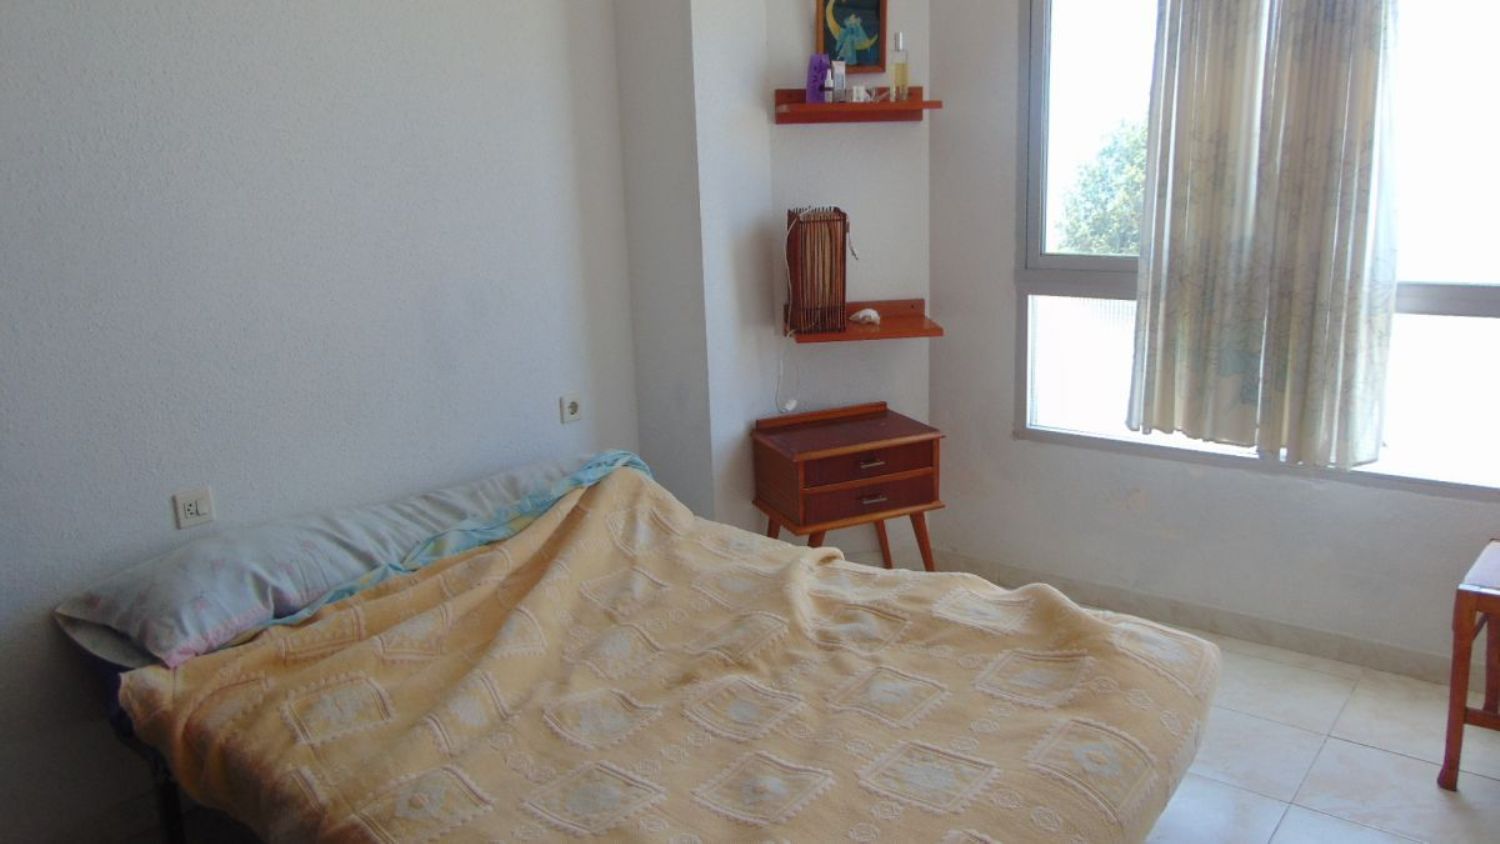 Flat for sale in Mezquitilla